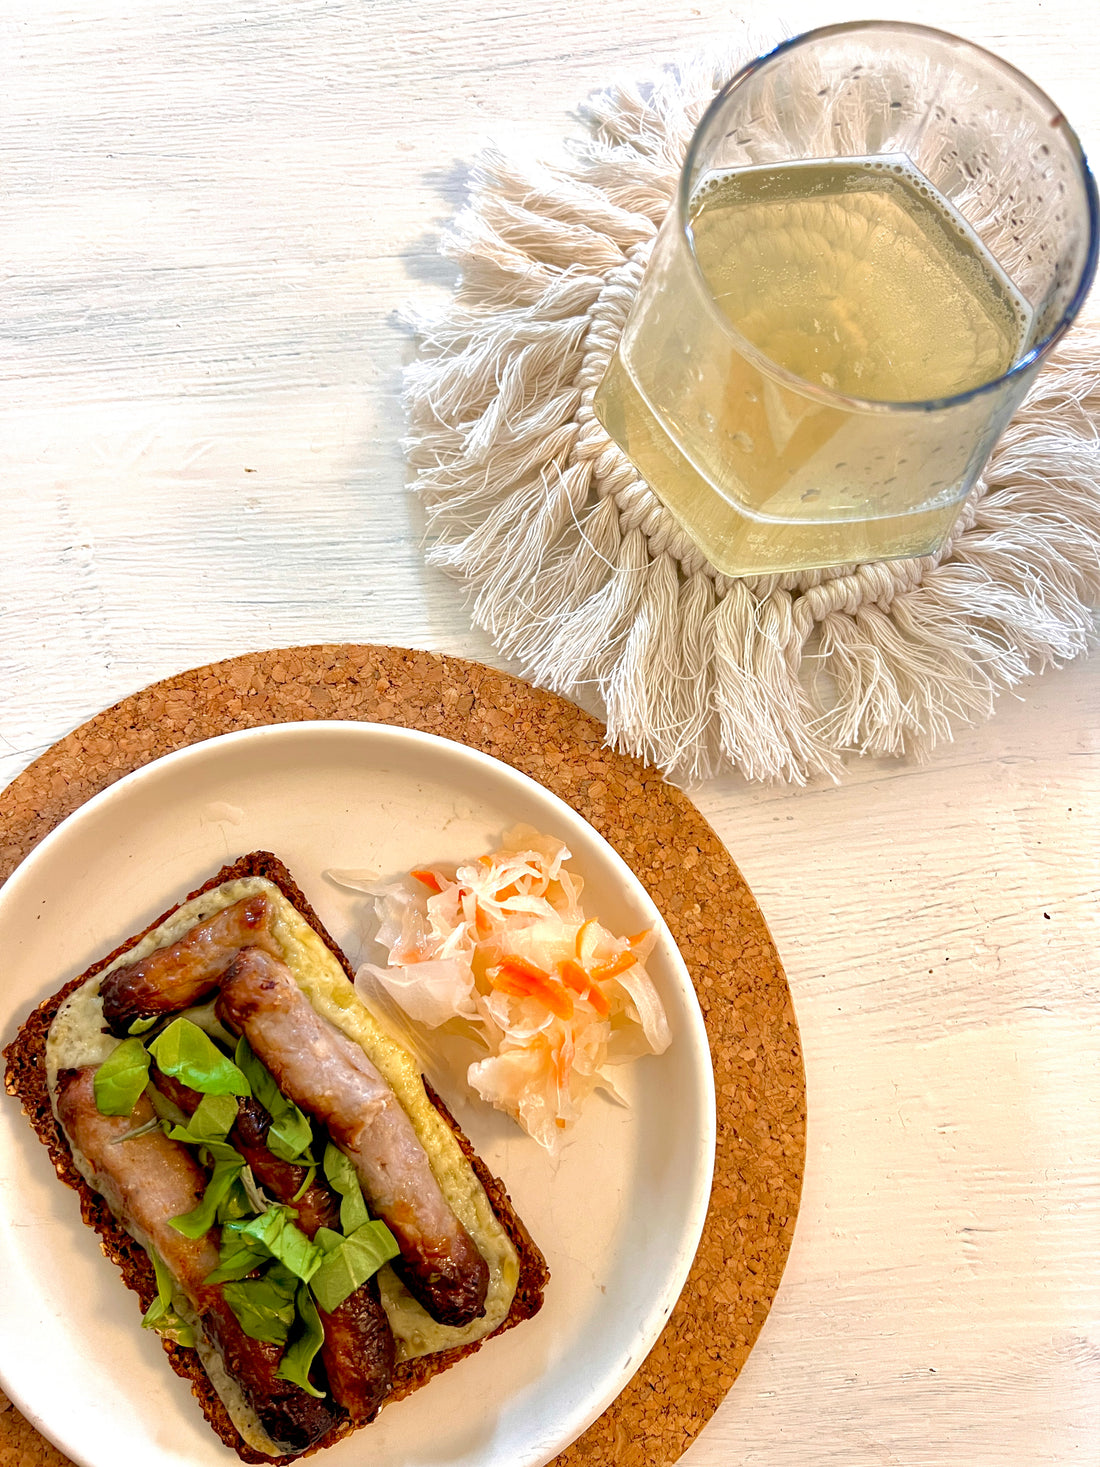 Melting Tradition with Health: Celebrating Grilled Cheese Sandwich Day with a Kombucha Pairing